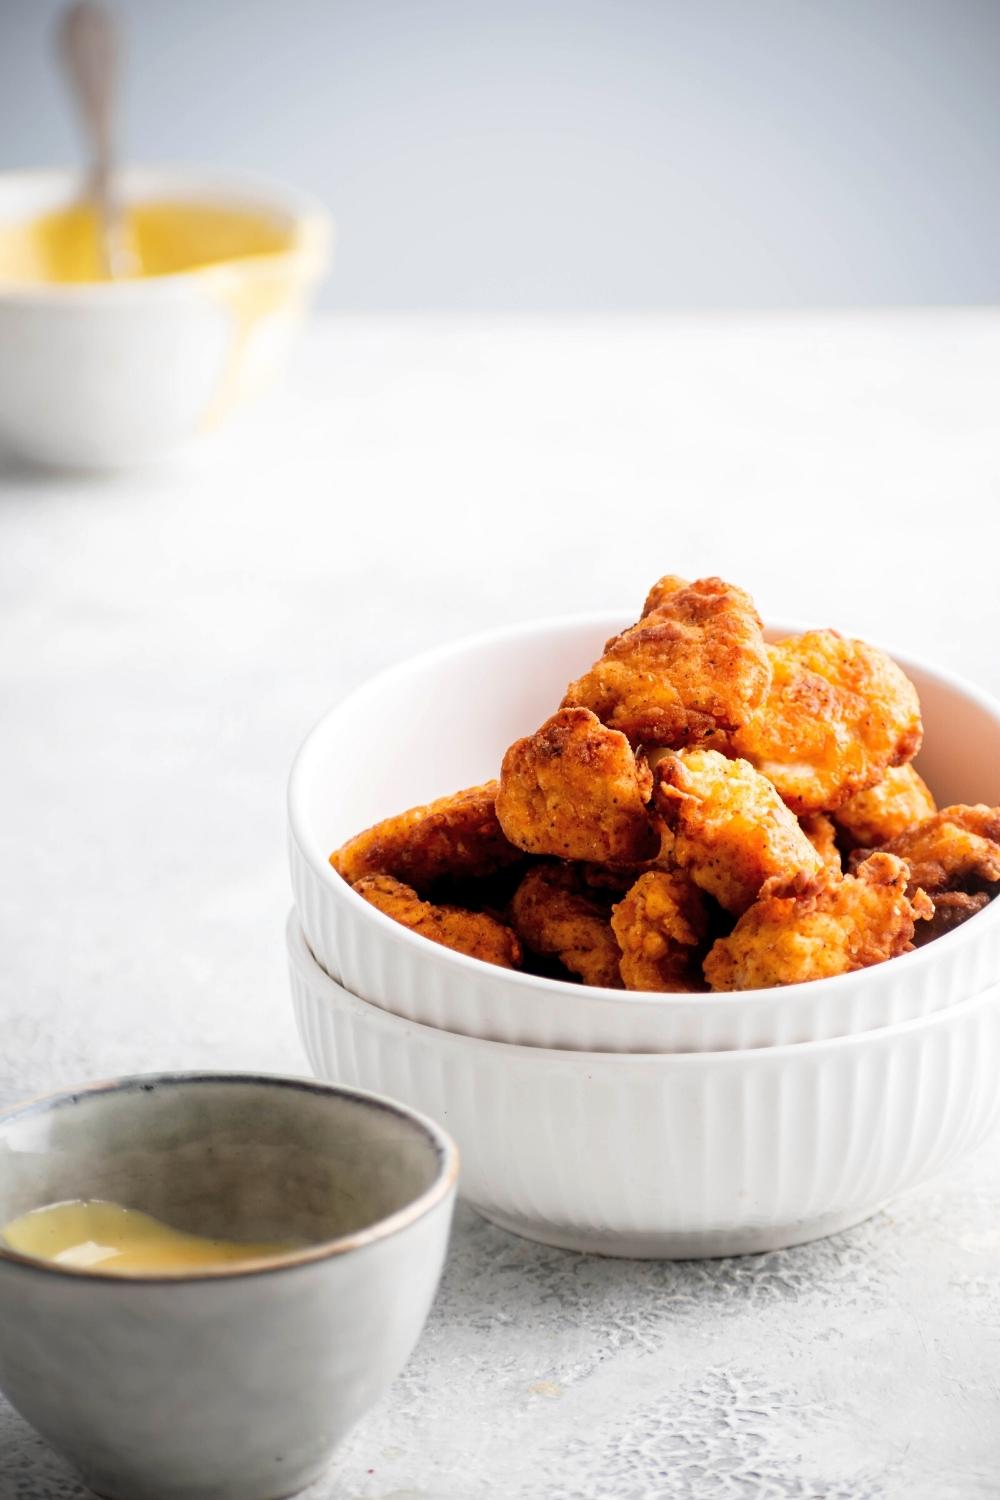 Chick-fil-A nuggets in a white bowl that is stacked on another white bowl. In front of it is a small gray bowl with Chick-fil-A sauce in it.